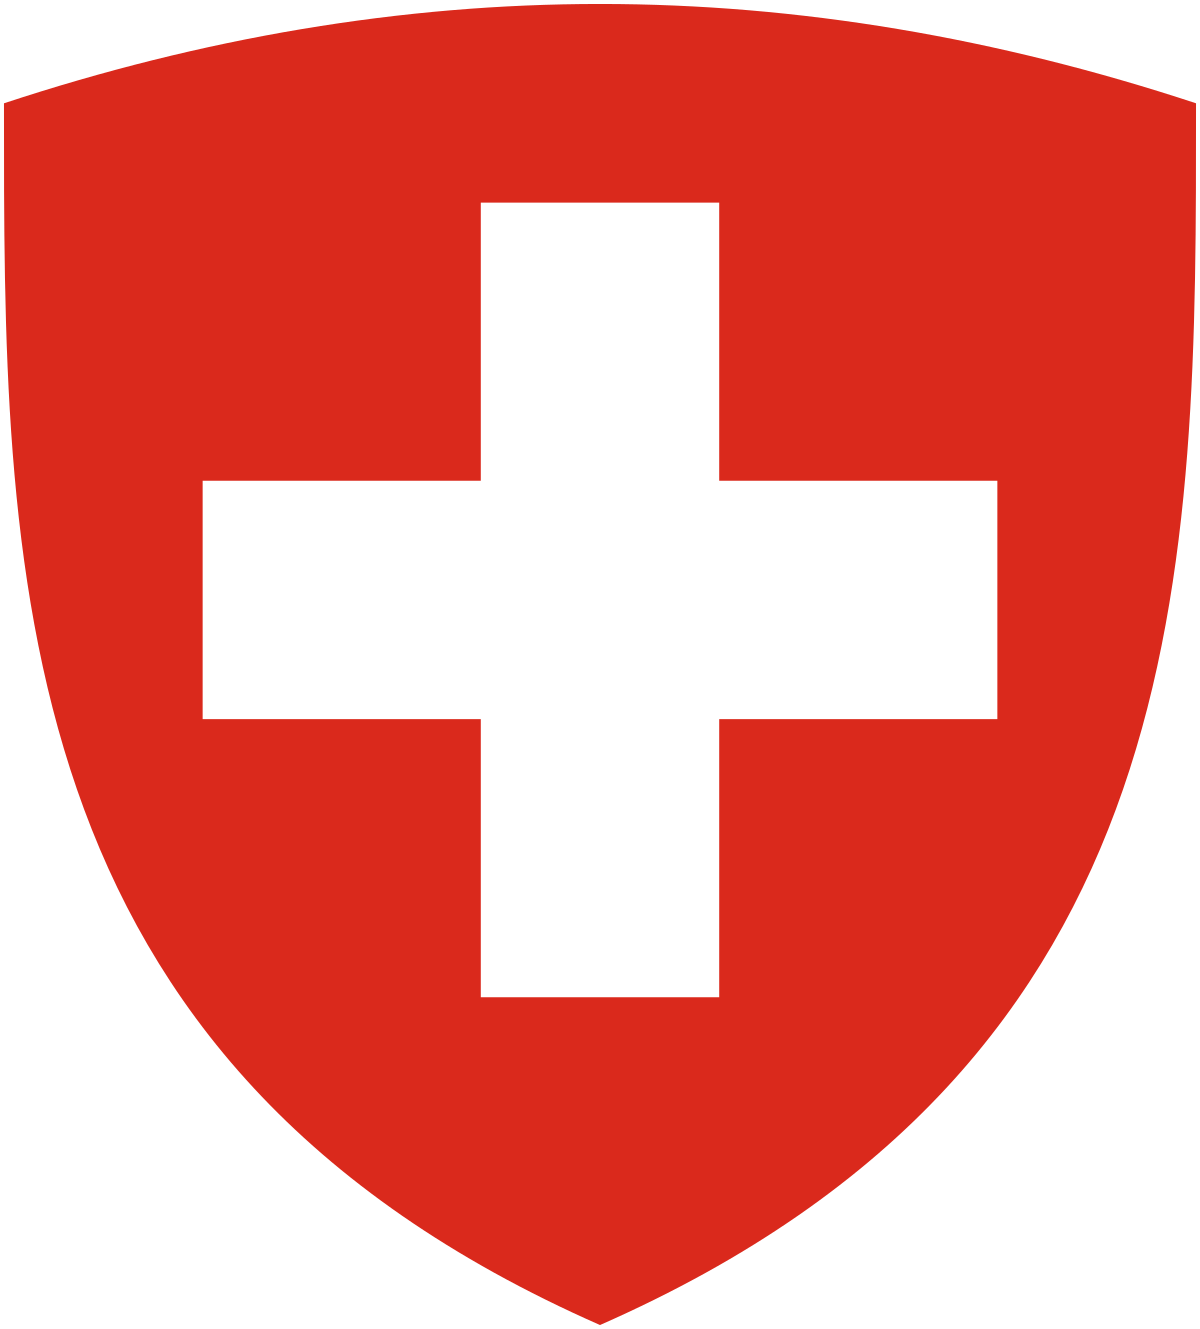 Logo of the Federal Council of Switzerland